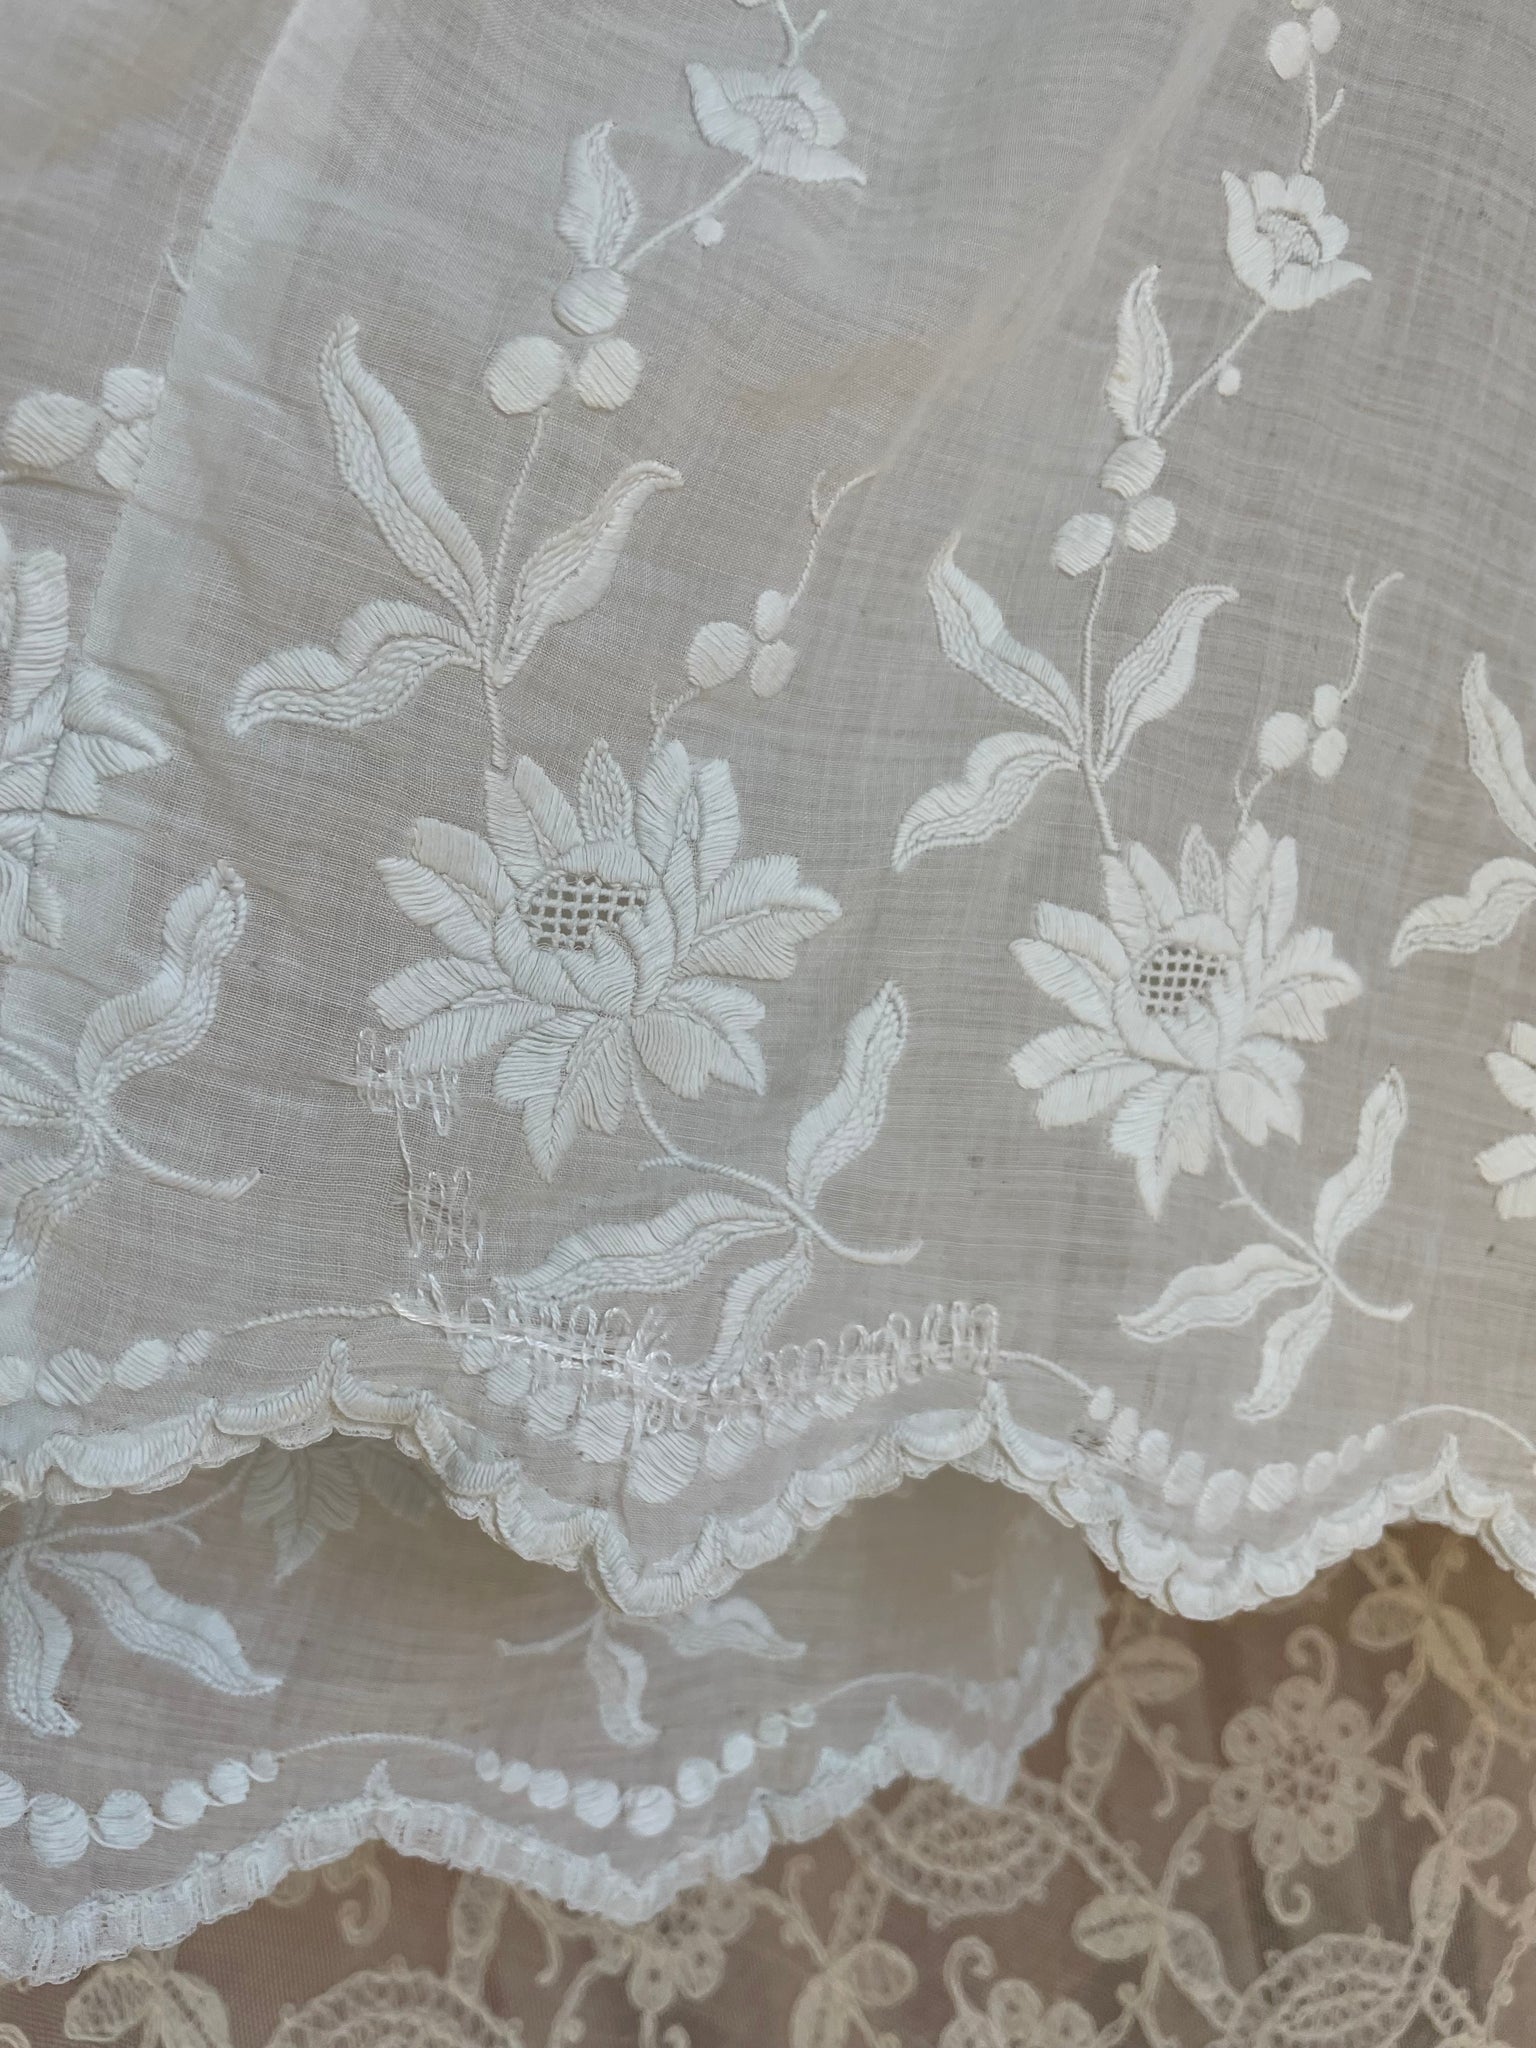 1900s White Cotton Skirt Floral Embroidery